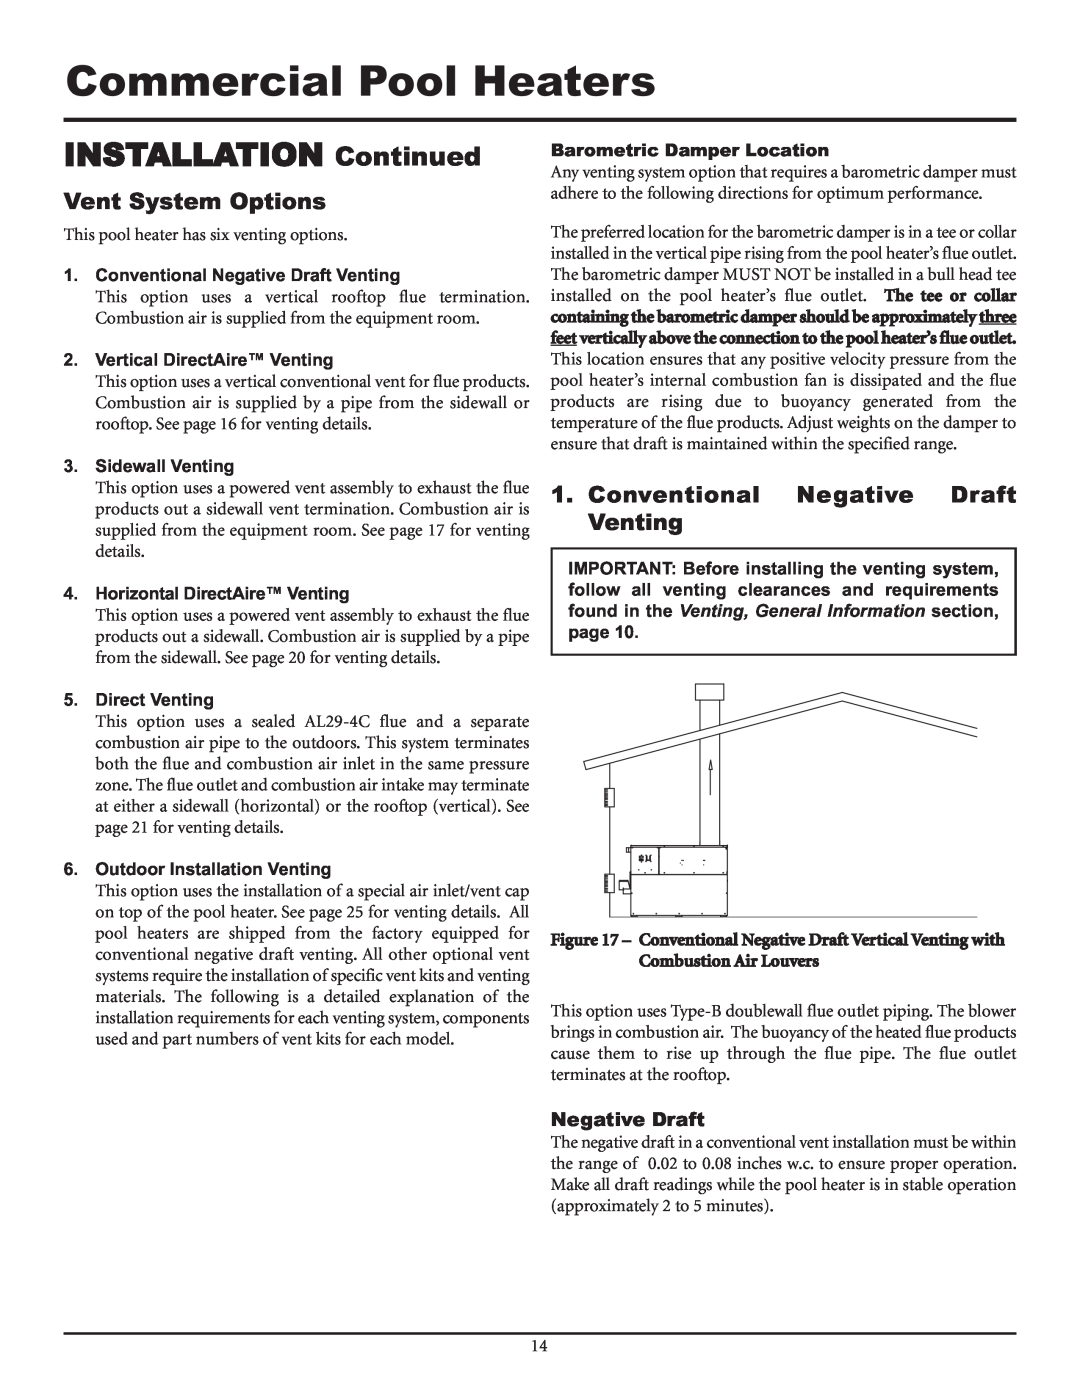 Lochinvar F0600187510 service manual Vent System Options, Conventional Negative Draft Venting, Vertical DirectAire Venting 